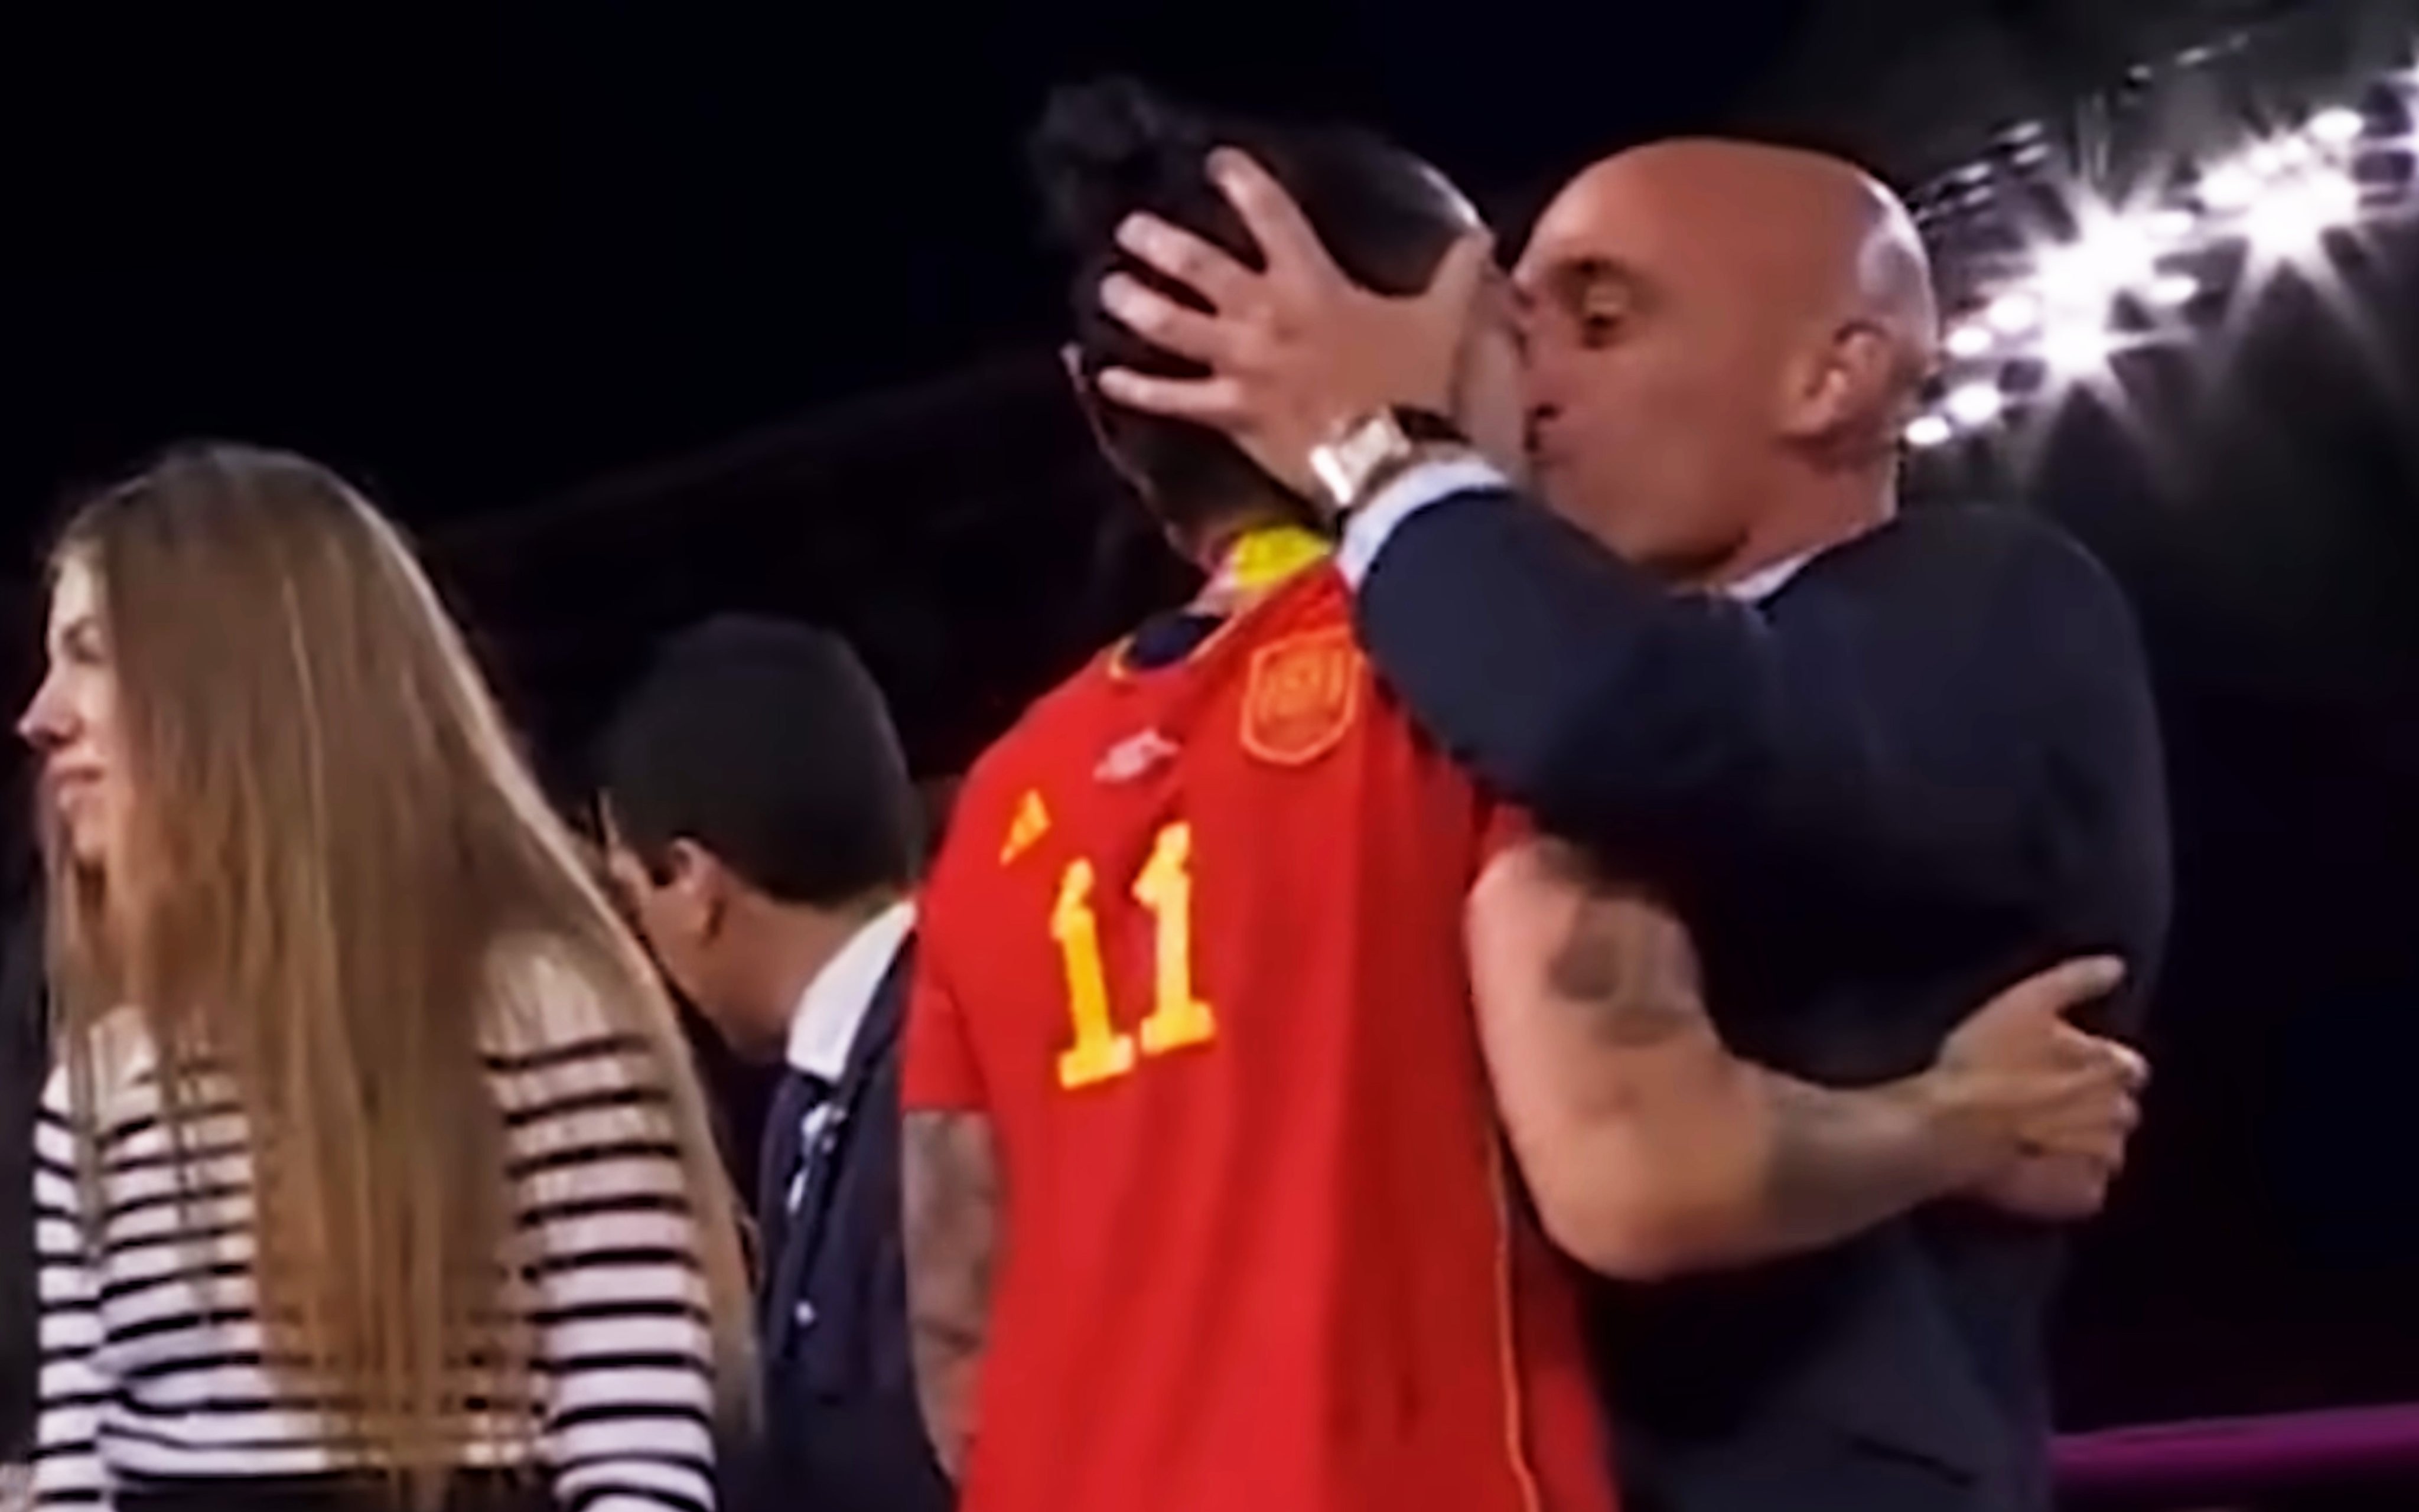 Luis Rubiales kisses Jenni Hermoso on the lips following Spain’s 1-0 victory over England in the Women’s World Cup final in Sydney, Australia on August 20. Photo: SCMPOST